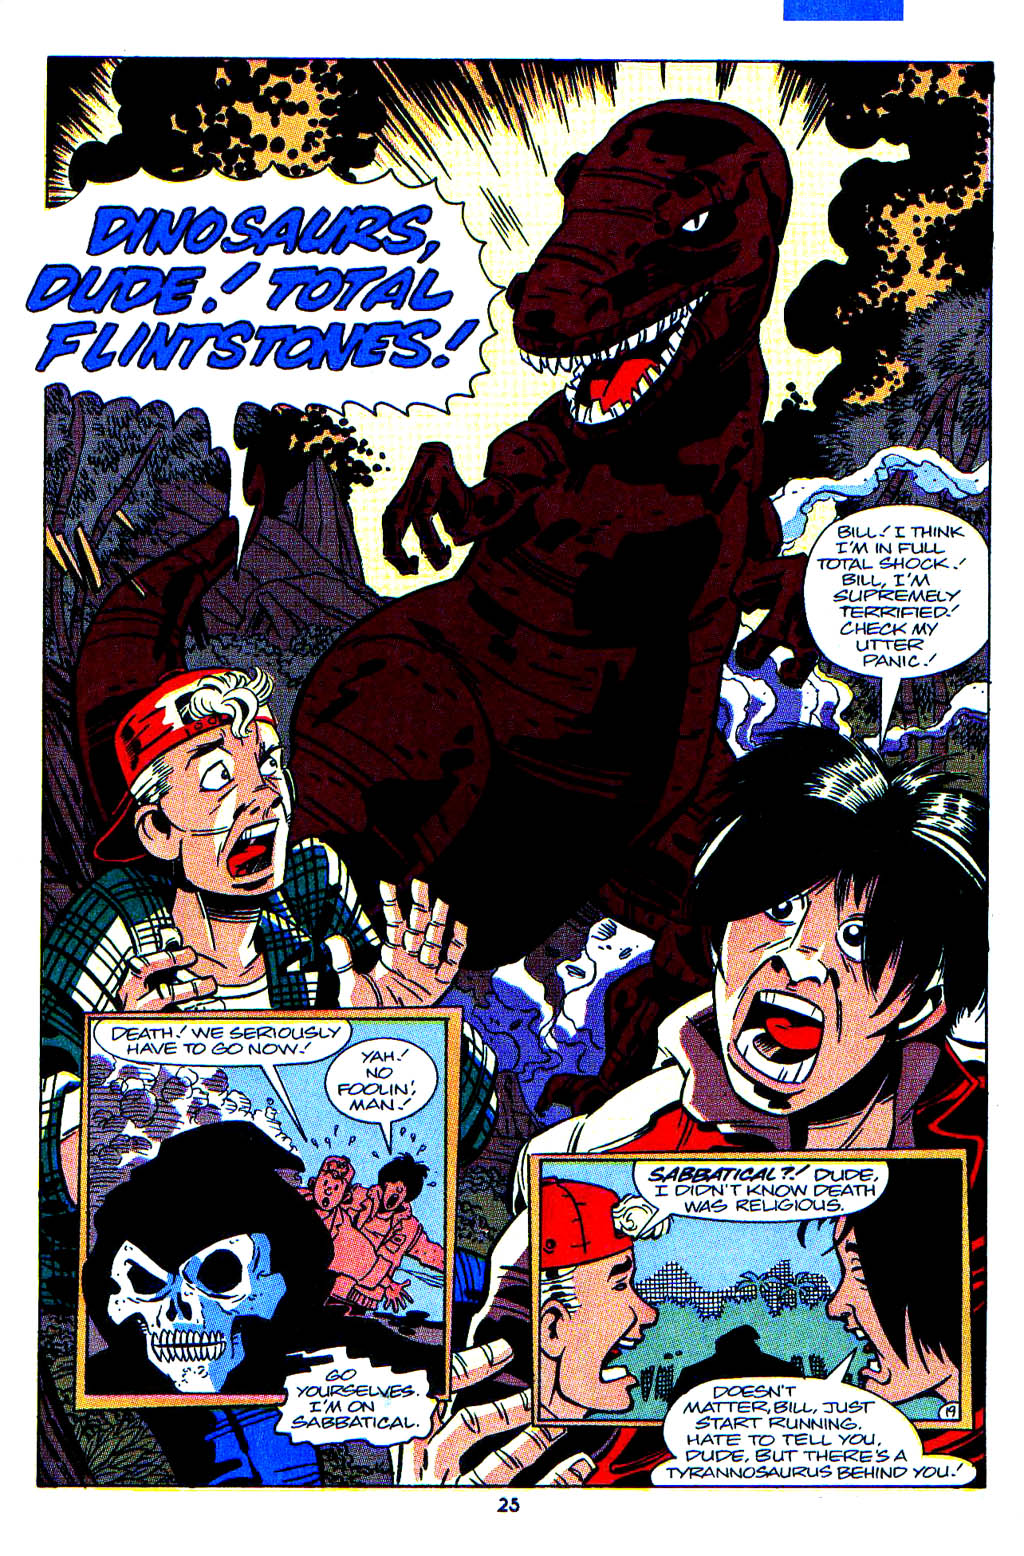 Read online Bill & Ted's Excellent Comic Book comic -  Issue #2 - 20